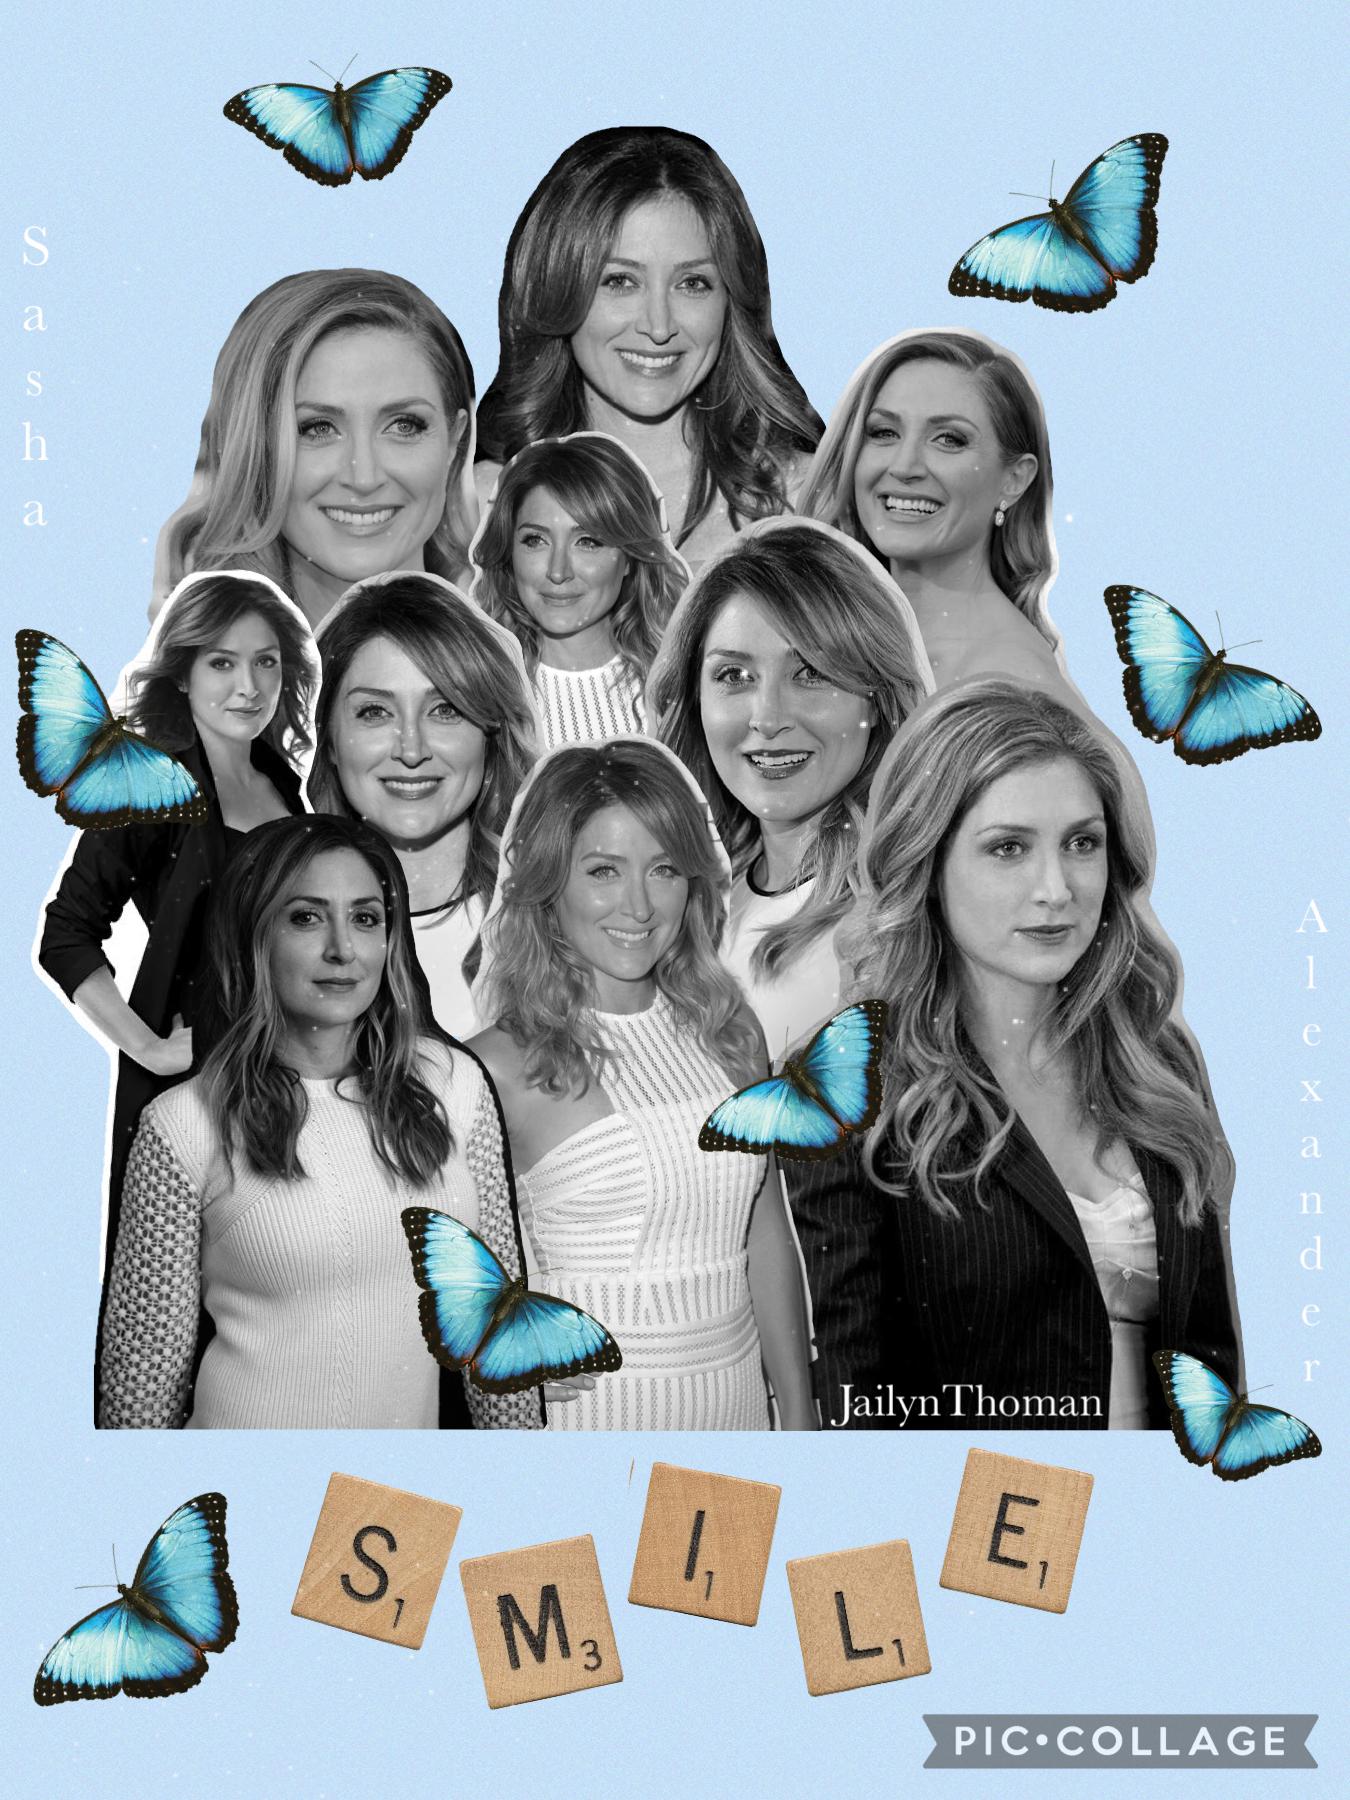 🦋TAP🦋
Yes another collage of this style! This is Sasha Alexander she is my second favorite actress! (5/21/21)
Qotd: favorite TV show?
Aotd: Rizzoli & Isles!